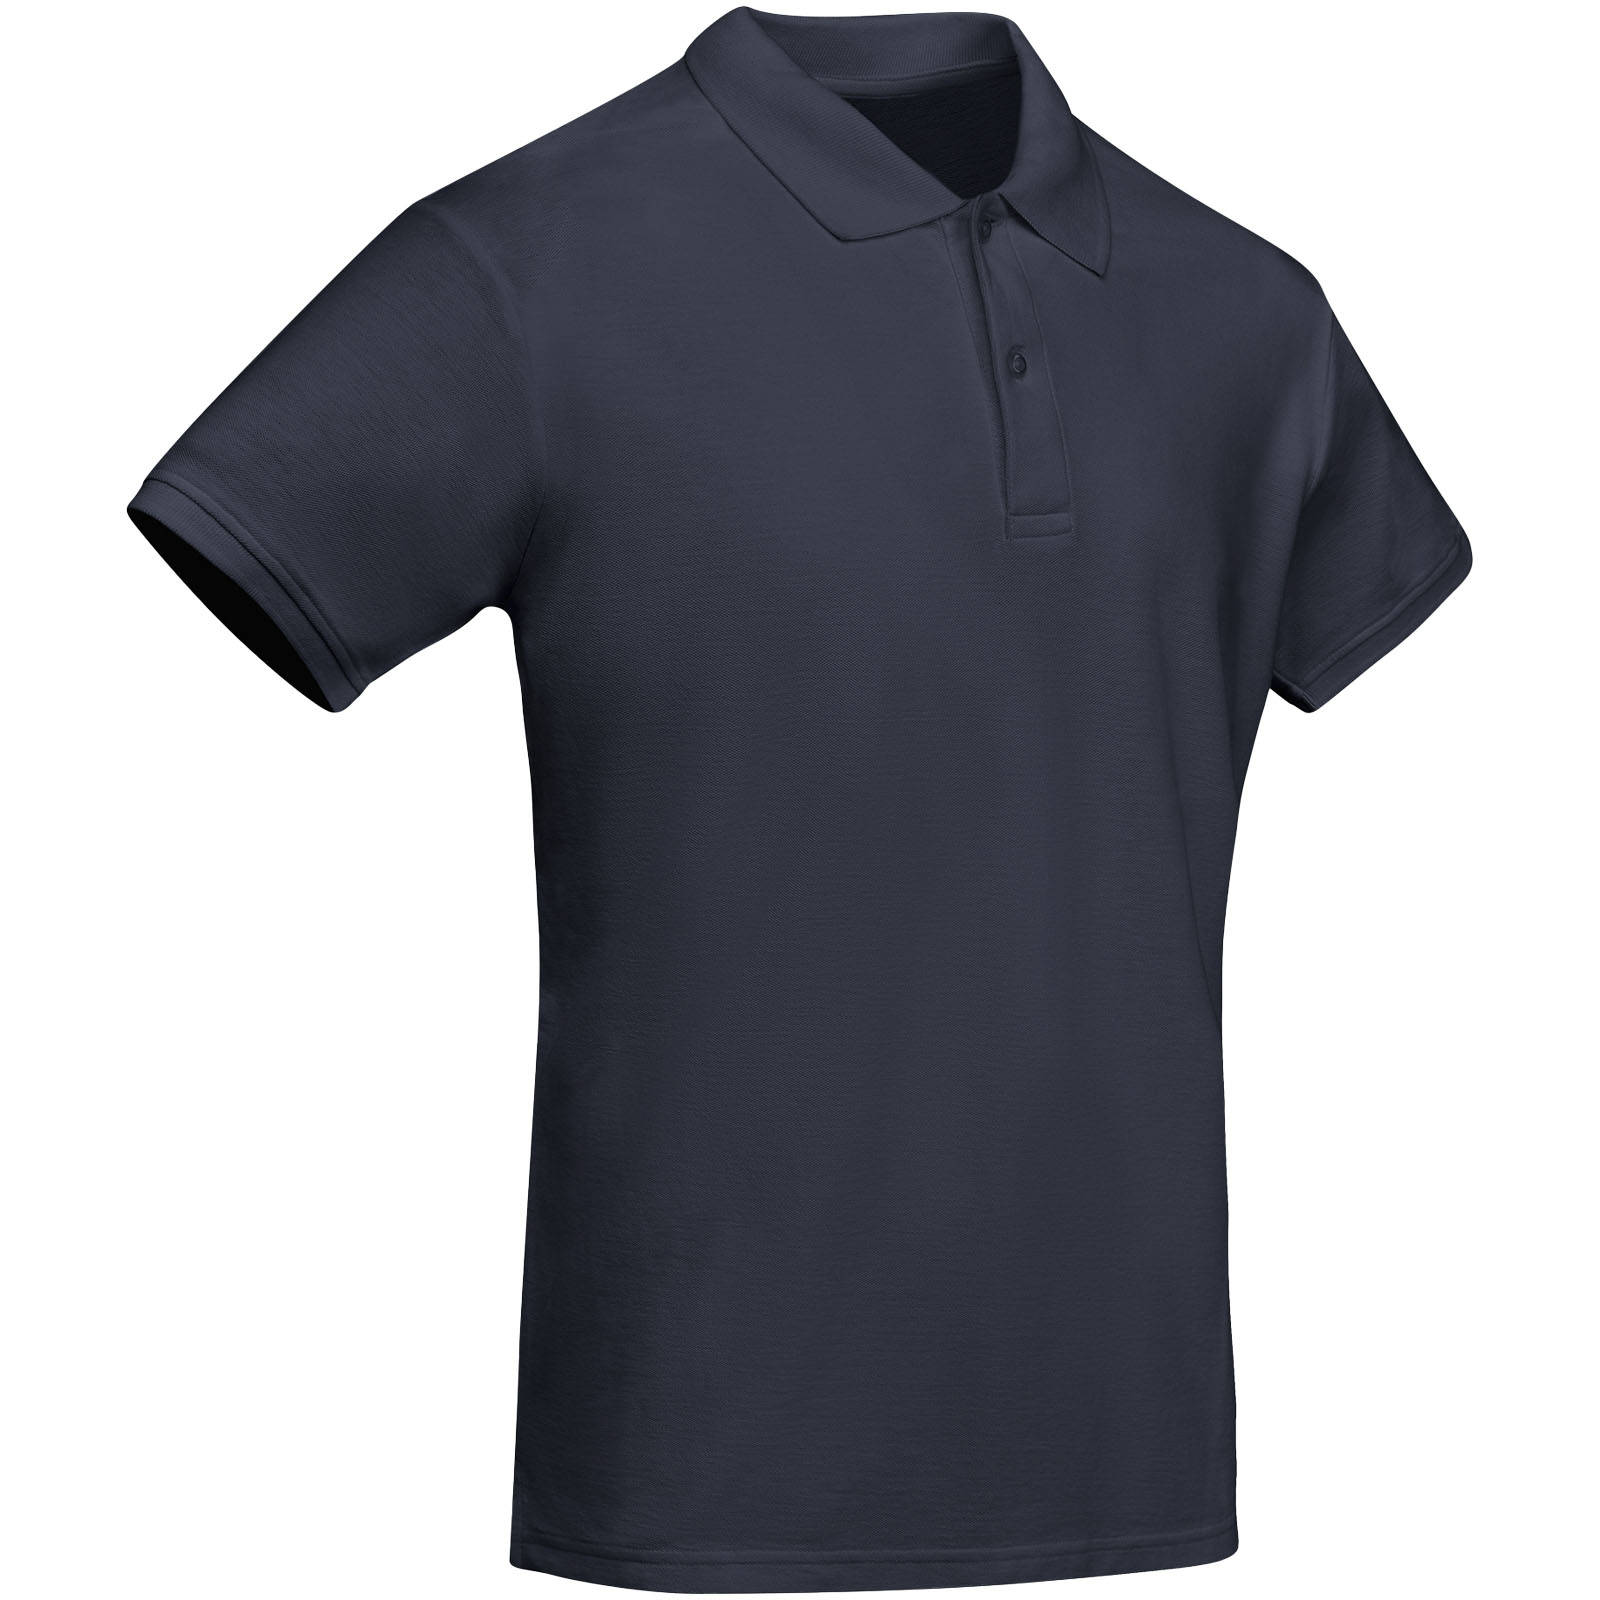 Advertising T-shirts - Prince short sleeve men's polo - 2